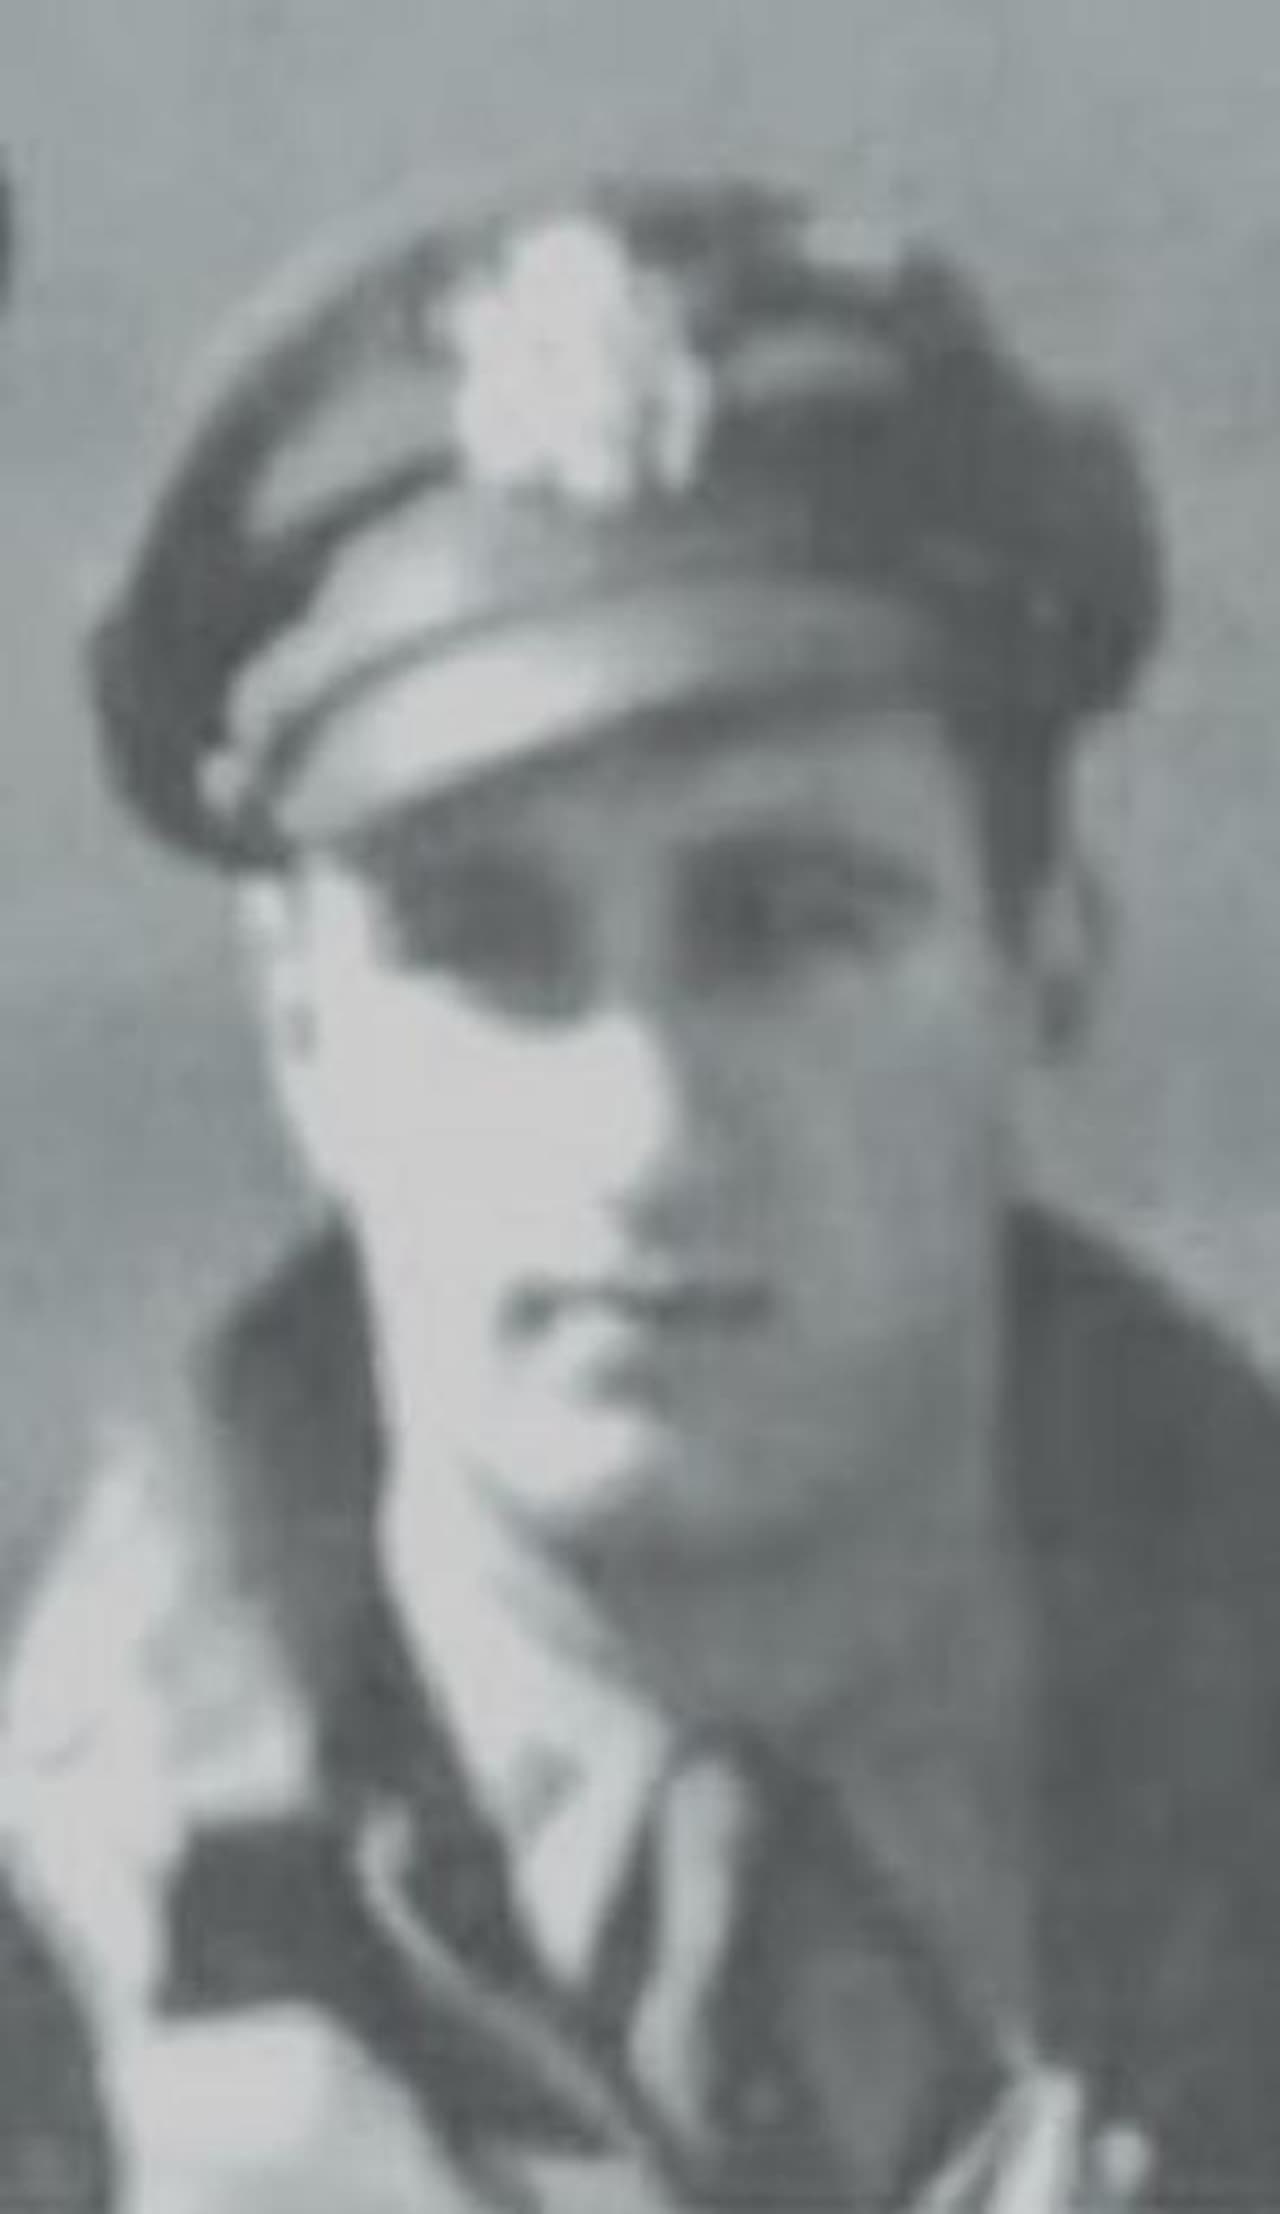 Charles Baffo, a hero bomber pilot from World War II, was honored posthumously in his hometown of Wilton. 